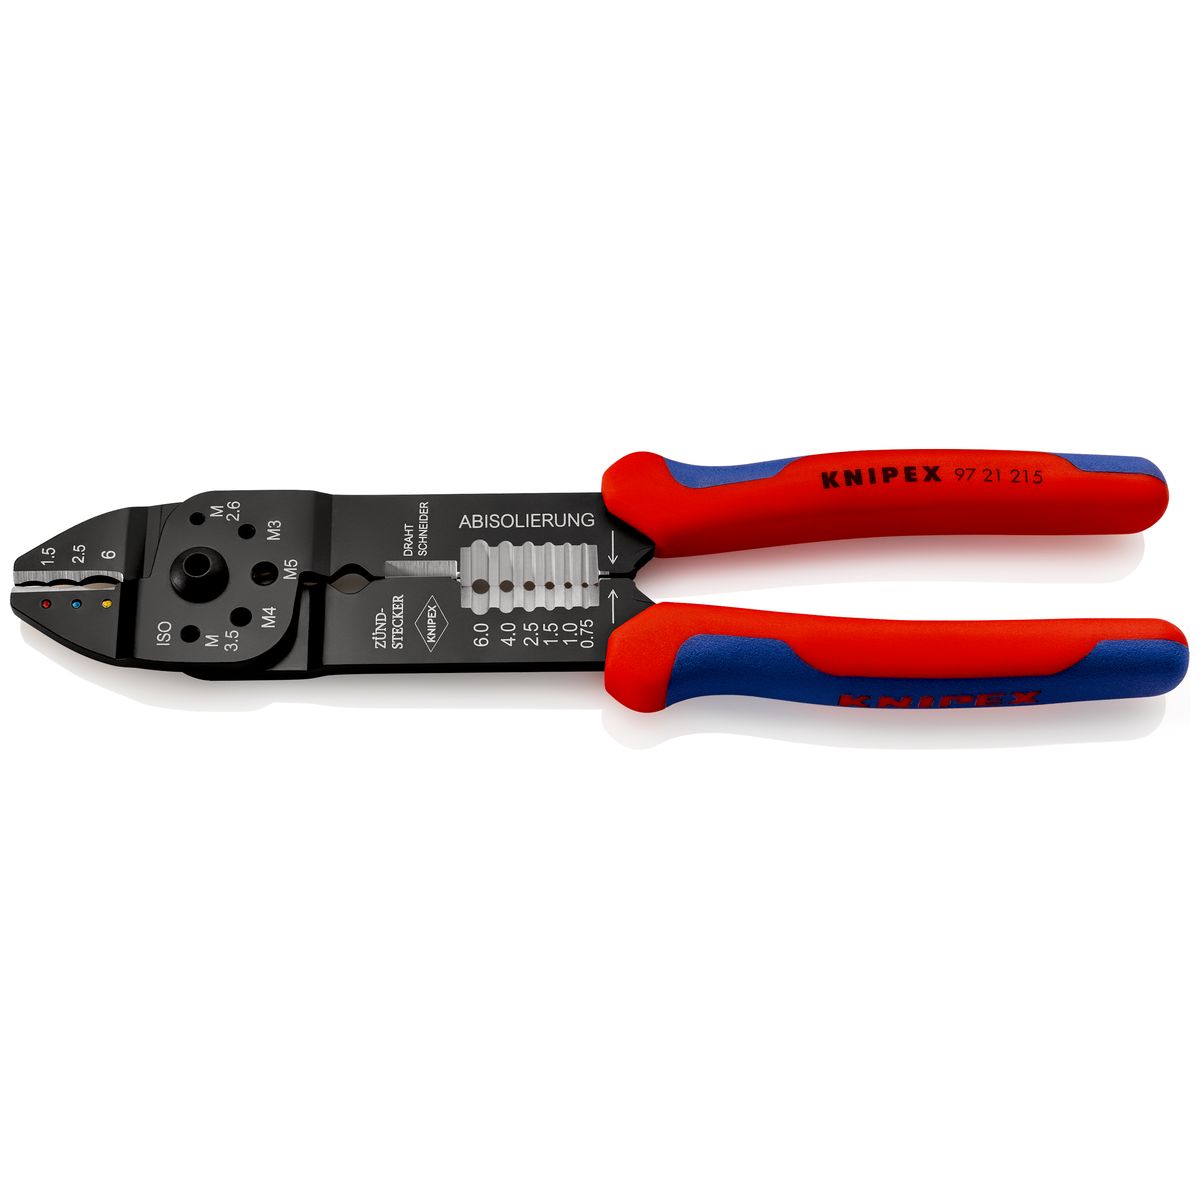 Crimping Pliers 9721215 Knipex